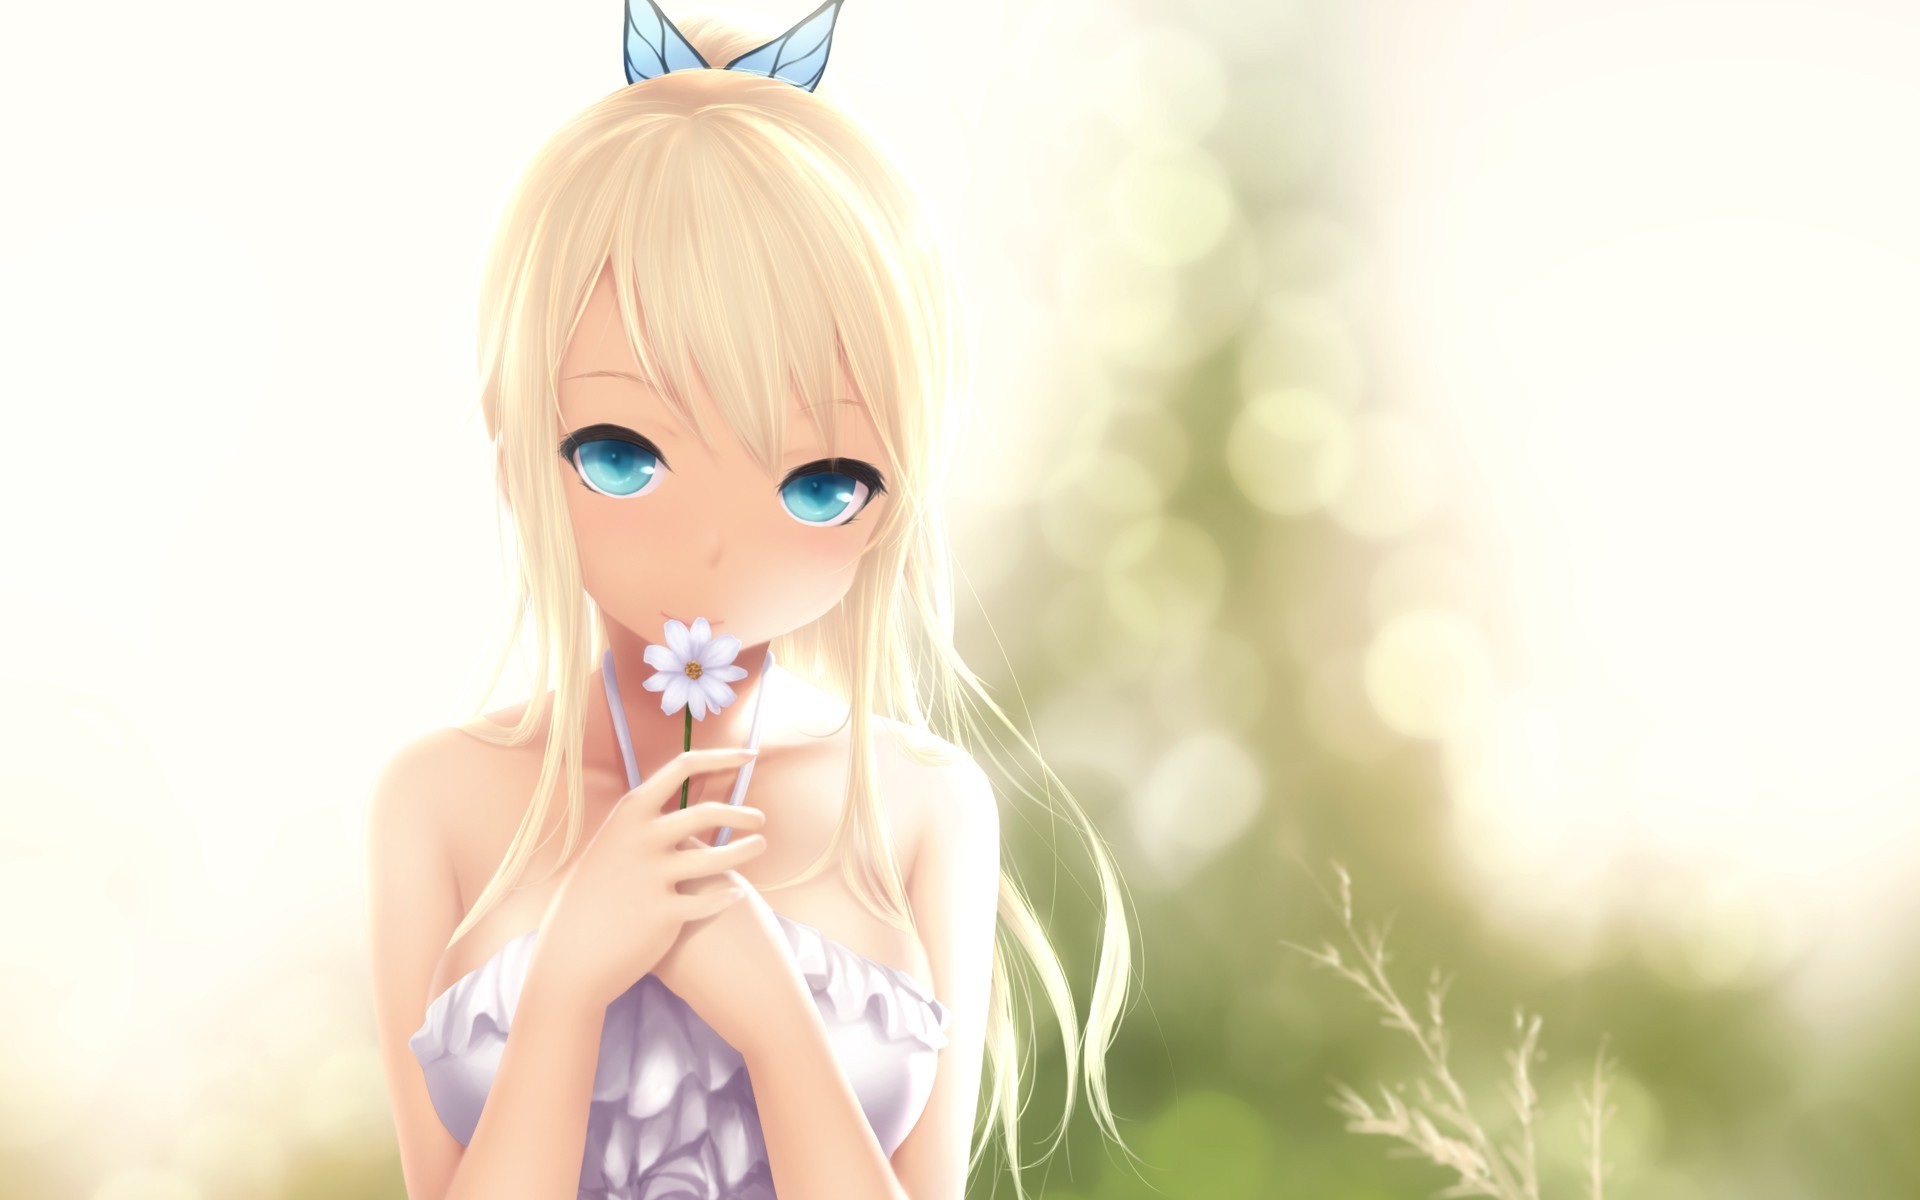 Anime Girls With Blond Hair And Blue Eyes 19x10 Wallpaper Teahub Io